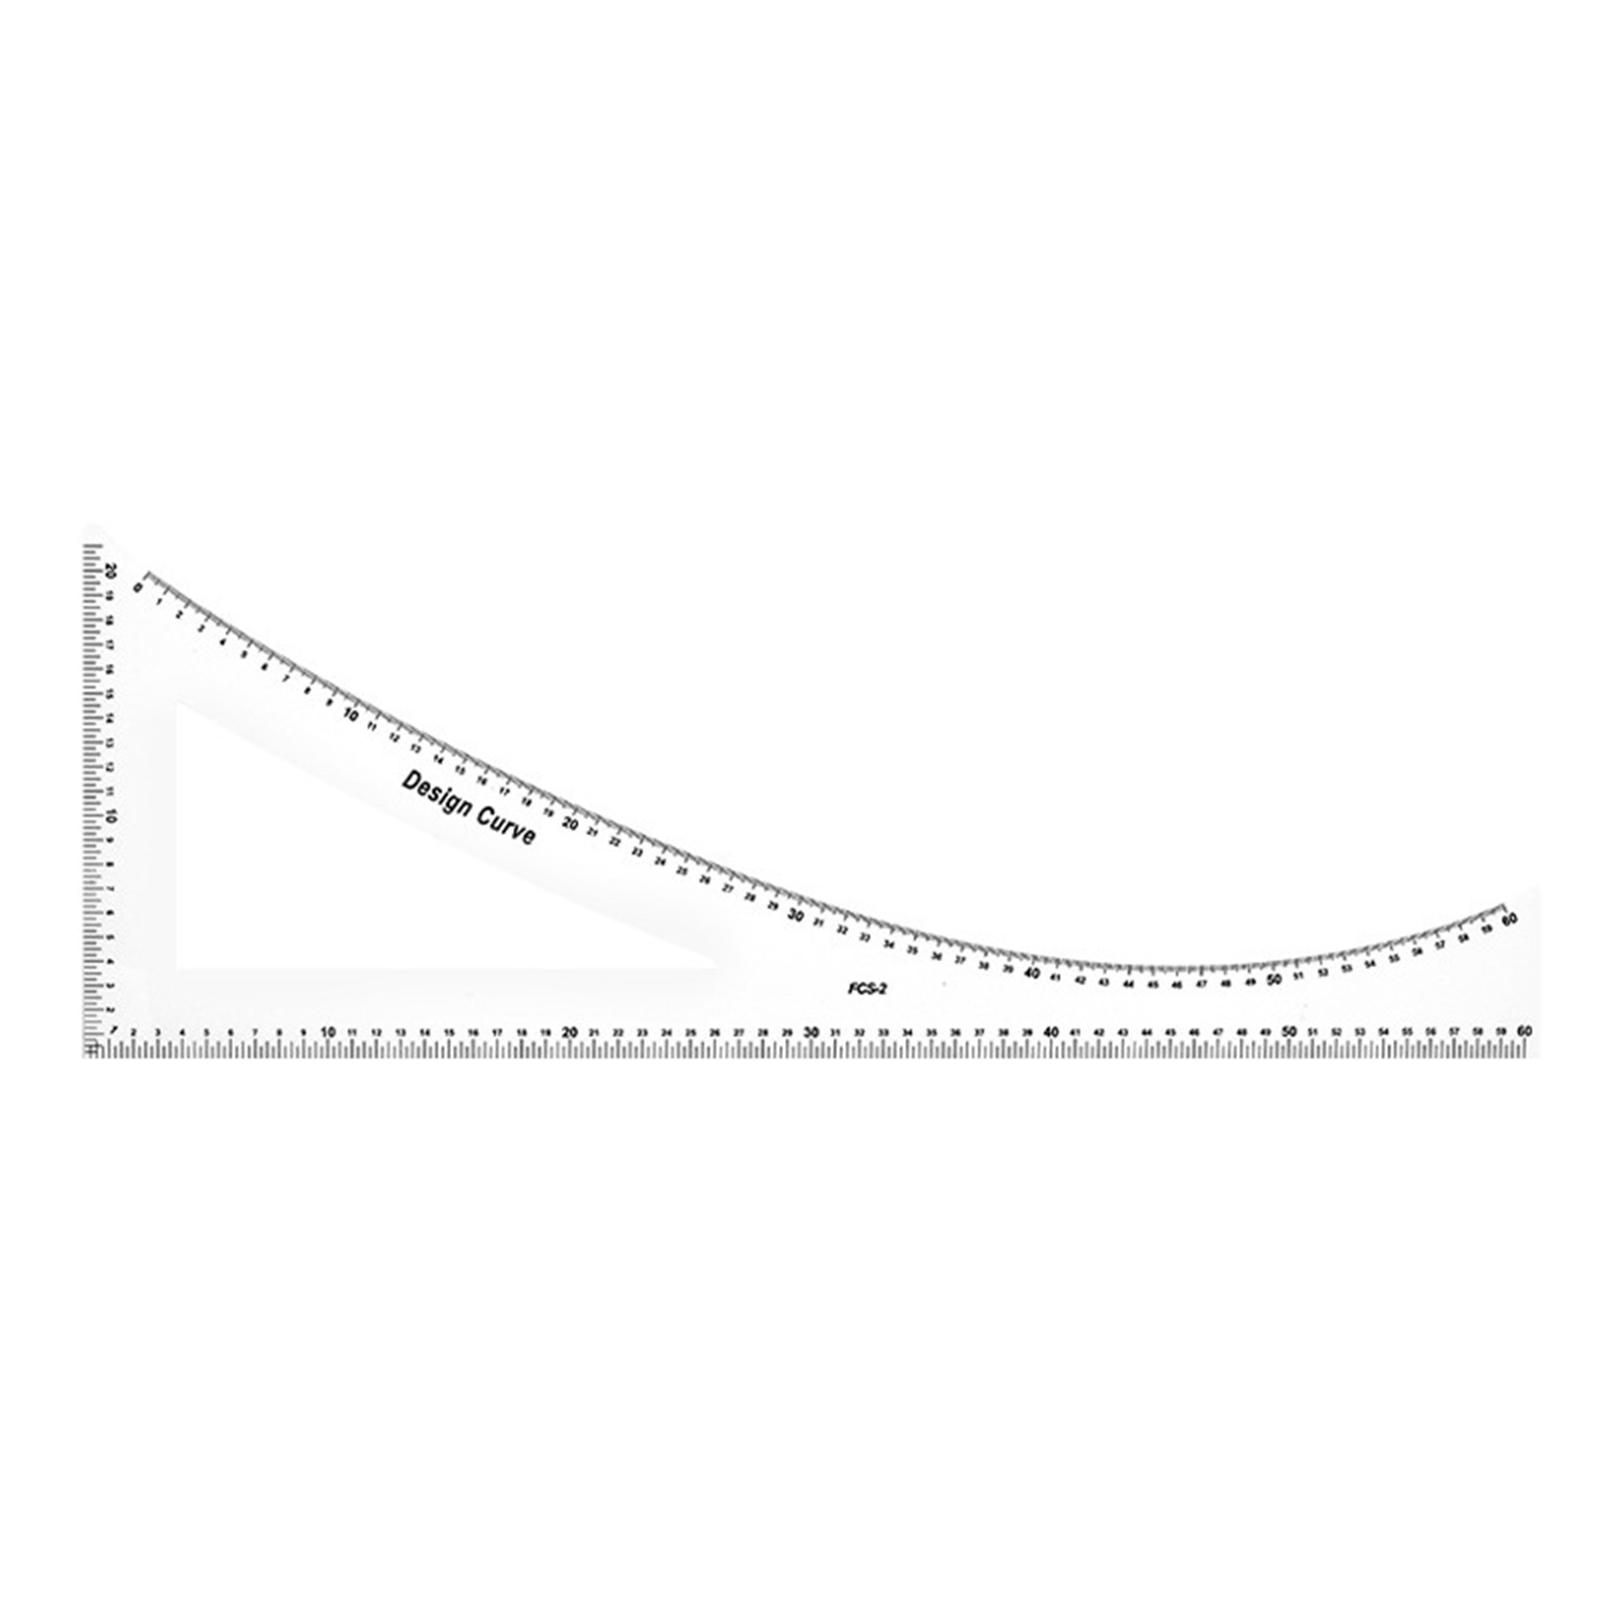 French Curve Ruler Tailor Tool Clothing Pattern Dress Curve Ruler Making  Template Metric Fashion Design Tailoring Measure , Design Curve 